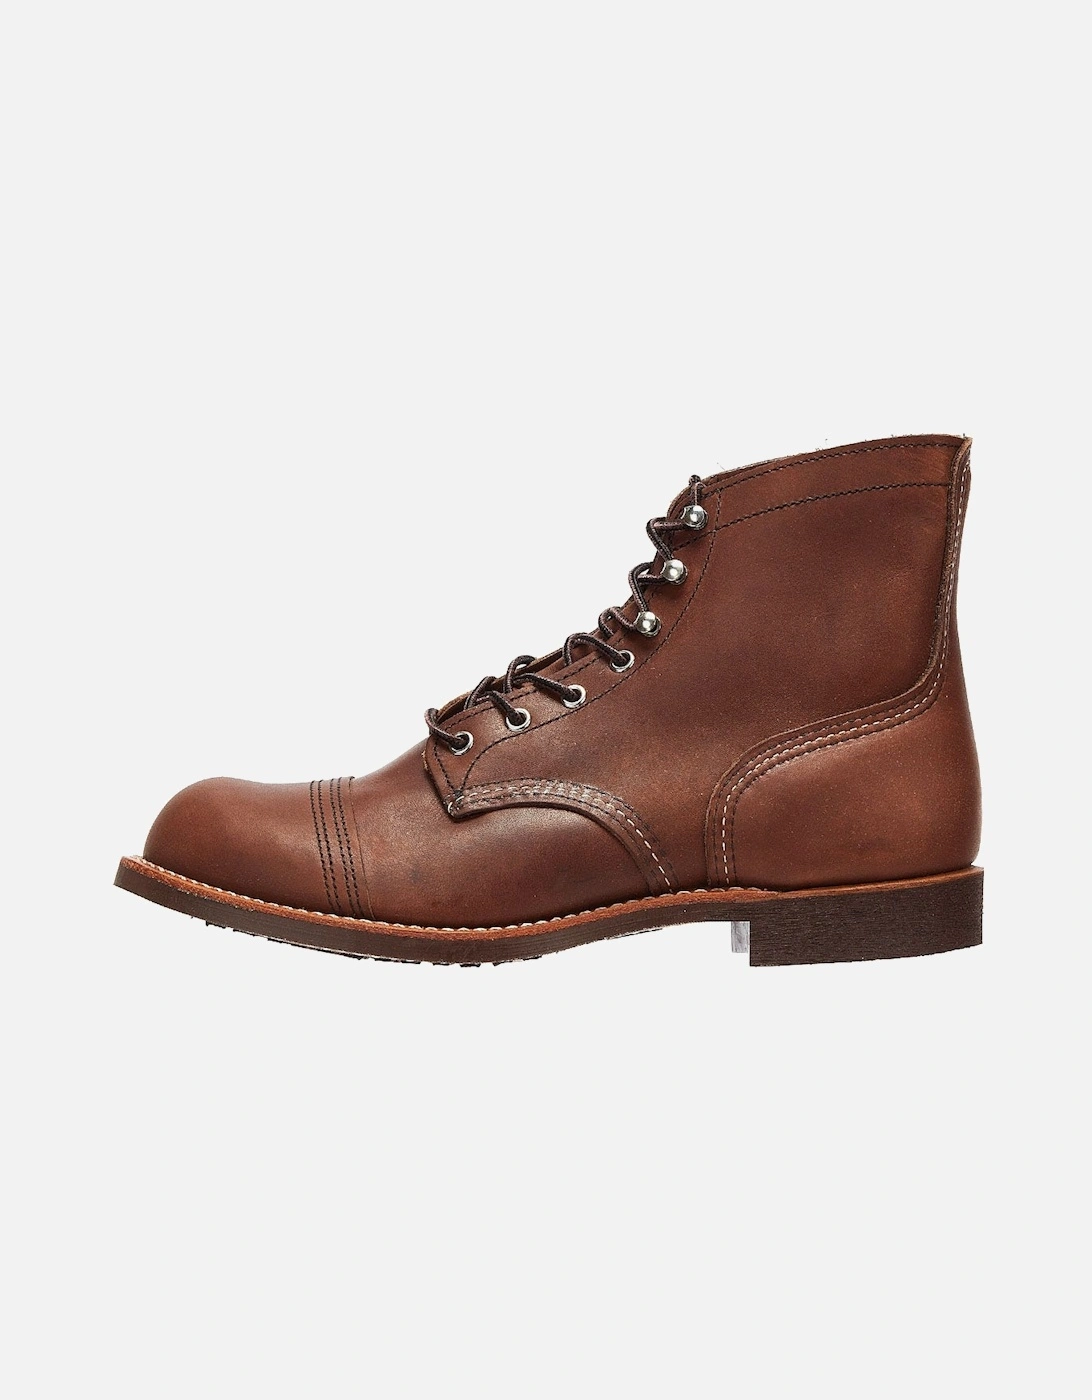 Shoes Iron Ranger Brown Amber Mens Boots